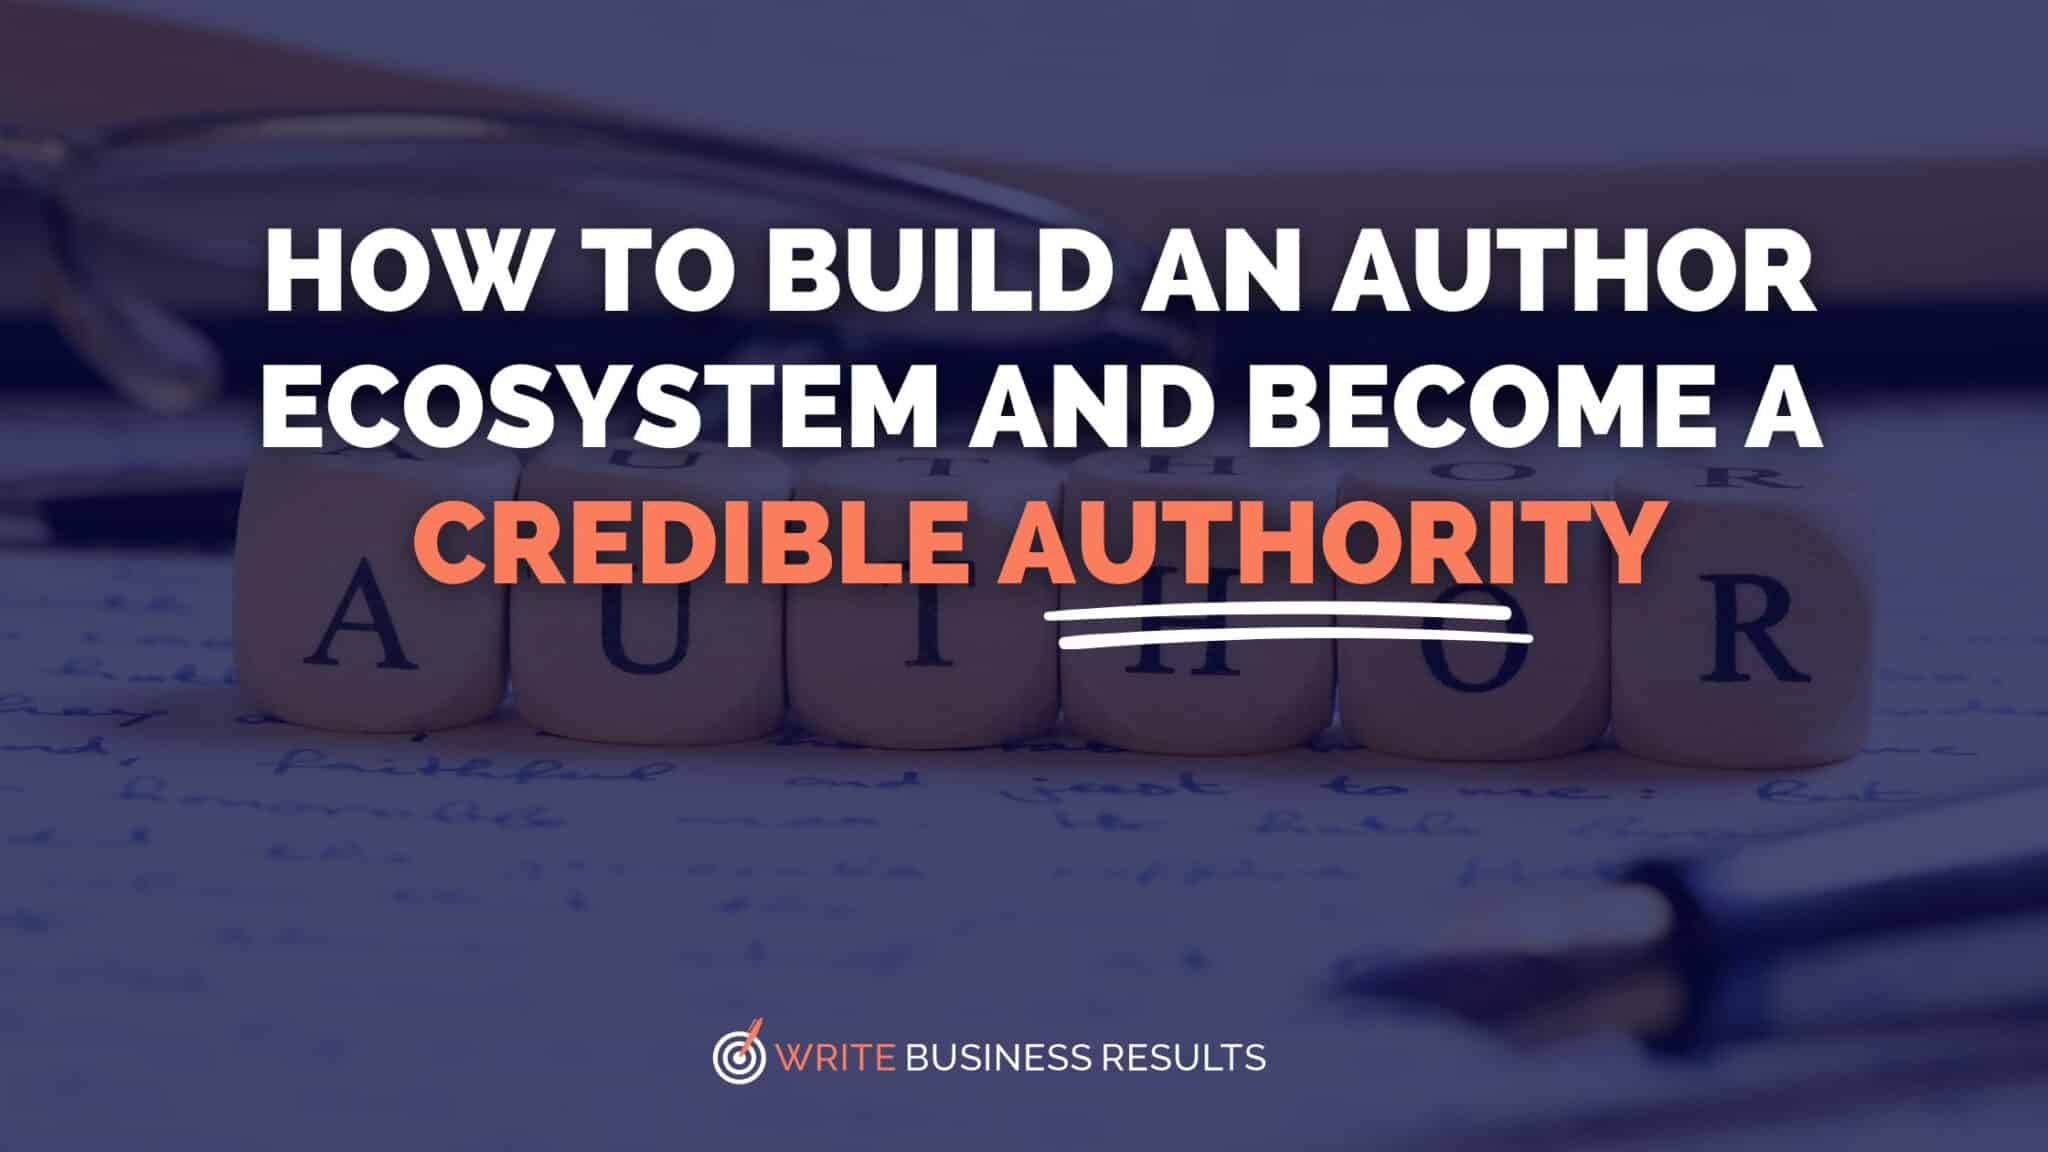 How To Build An Author Ecosystem And Become A Credible Authority